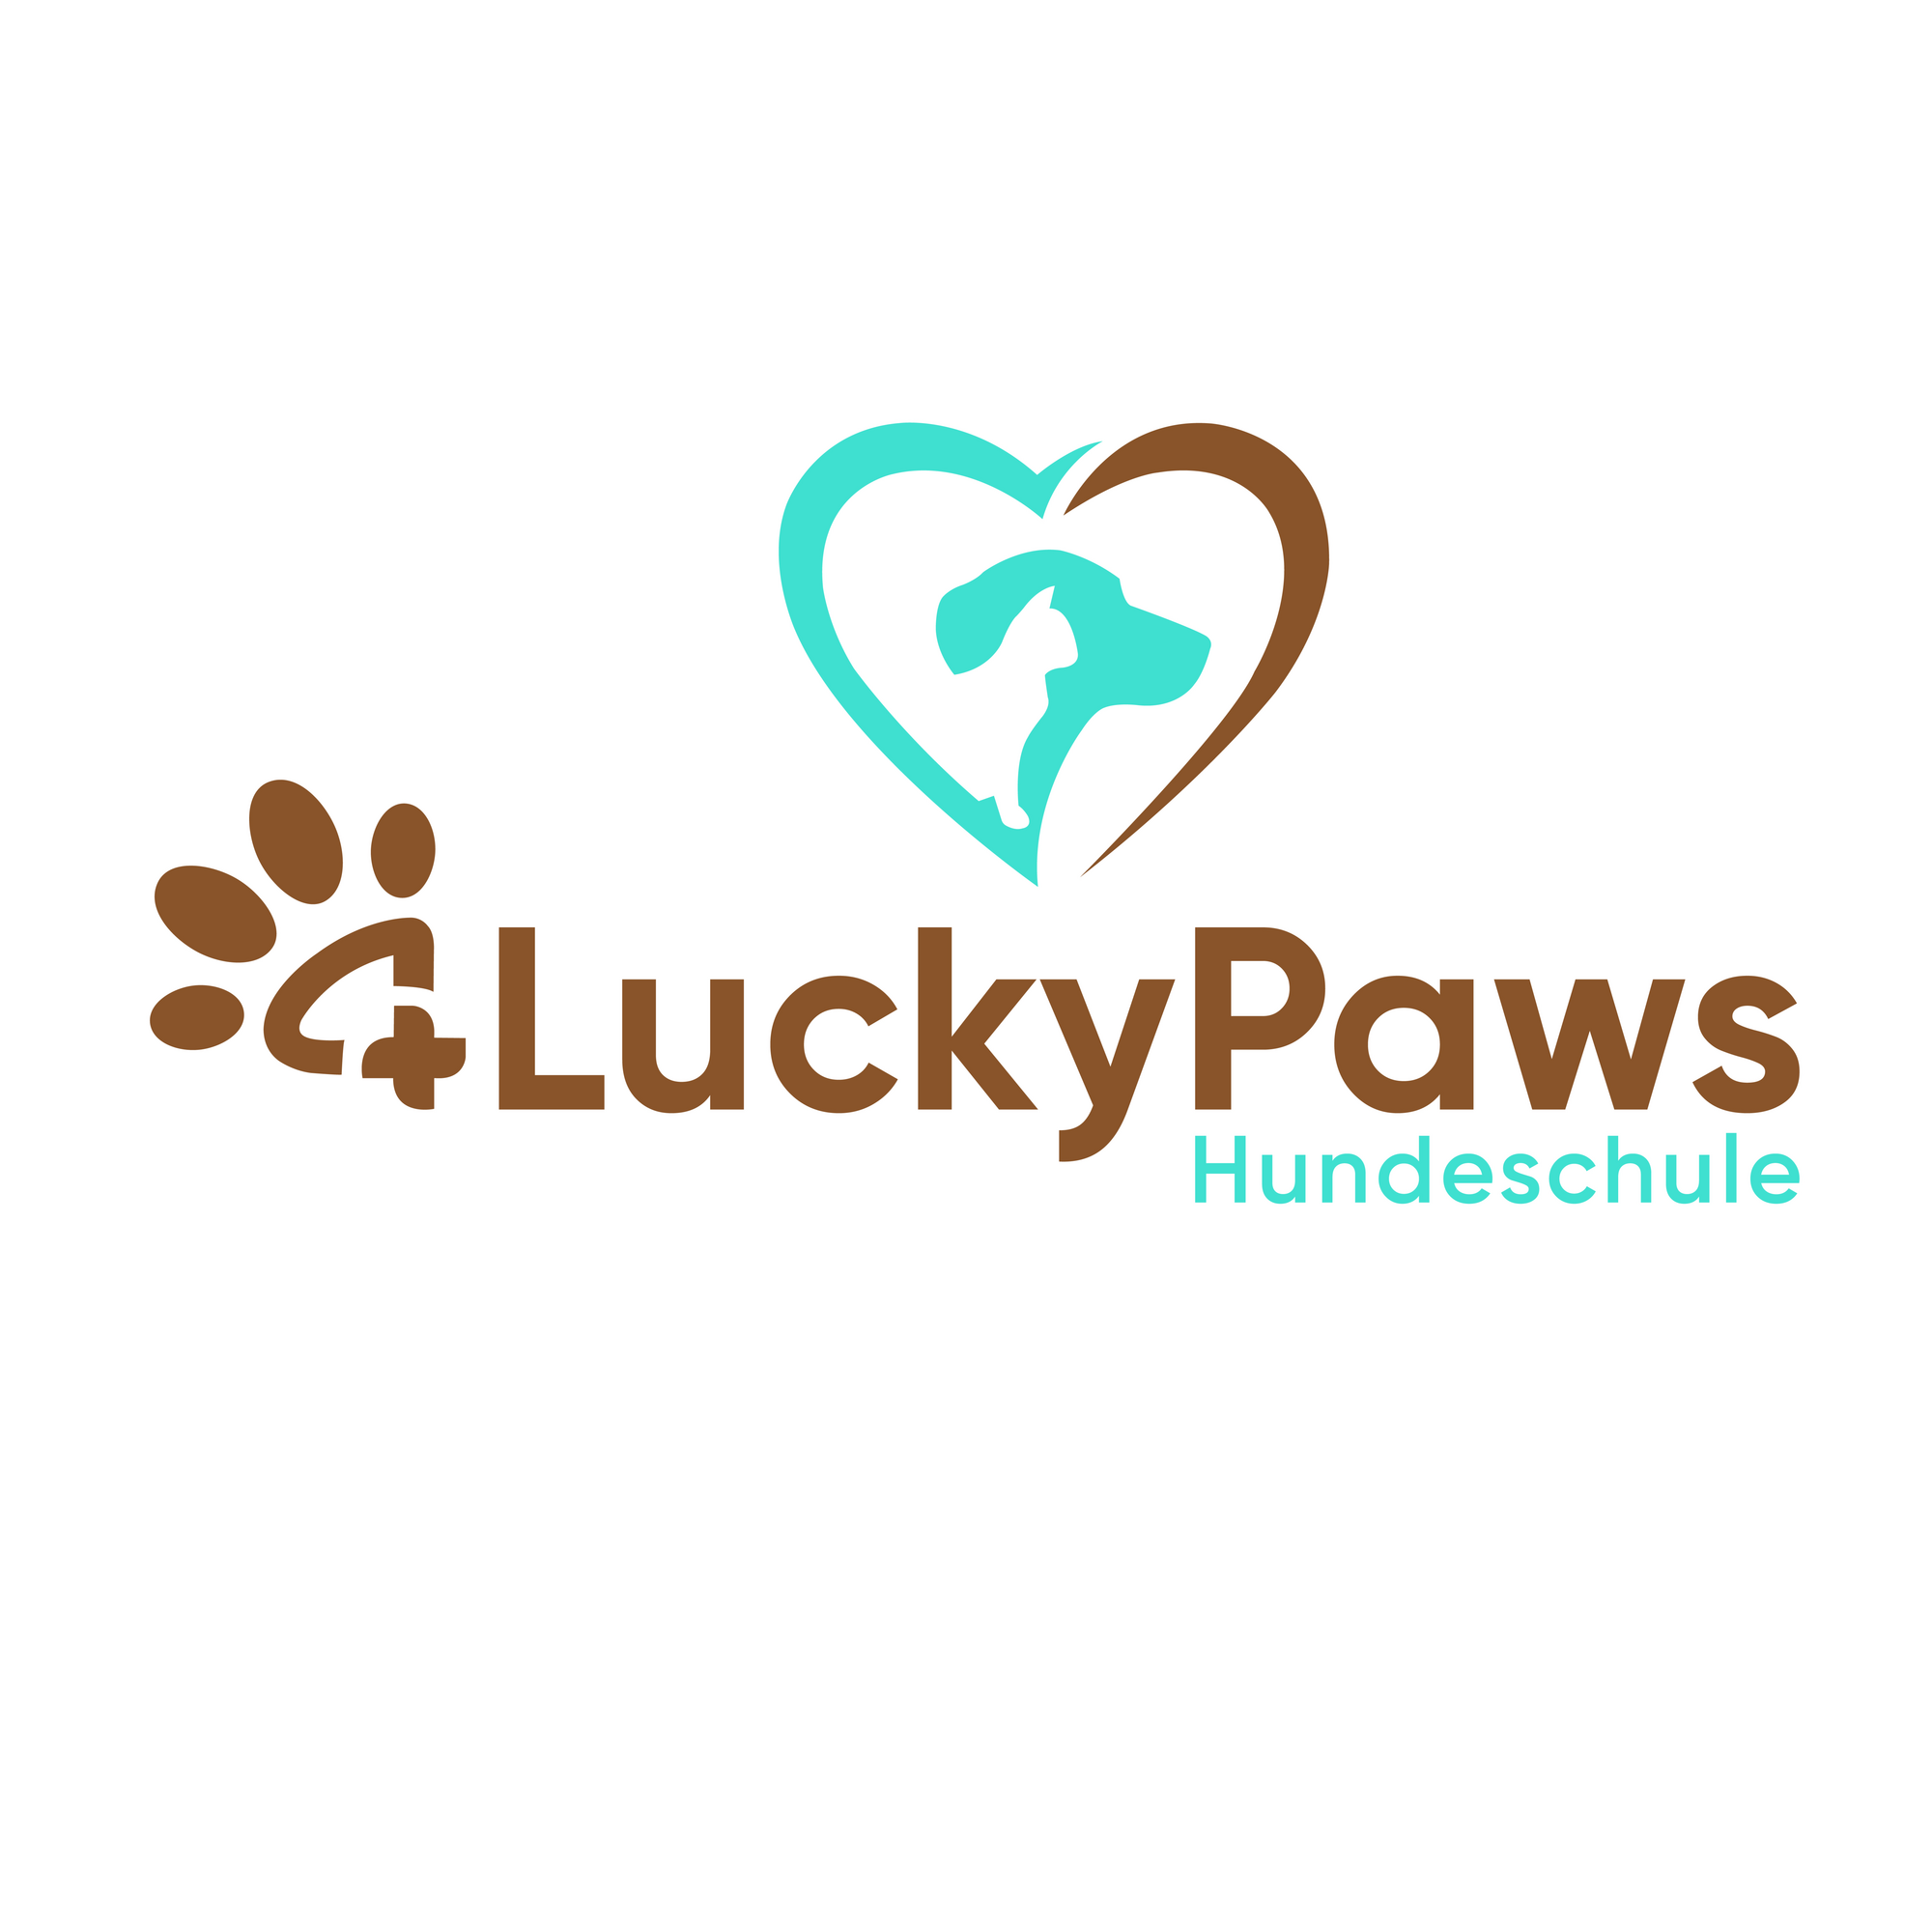 Bild 12 Mobile Hundeschule 4LuckyPaws in Uffing am Staffelsee